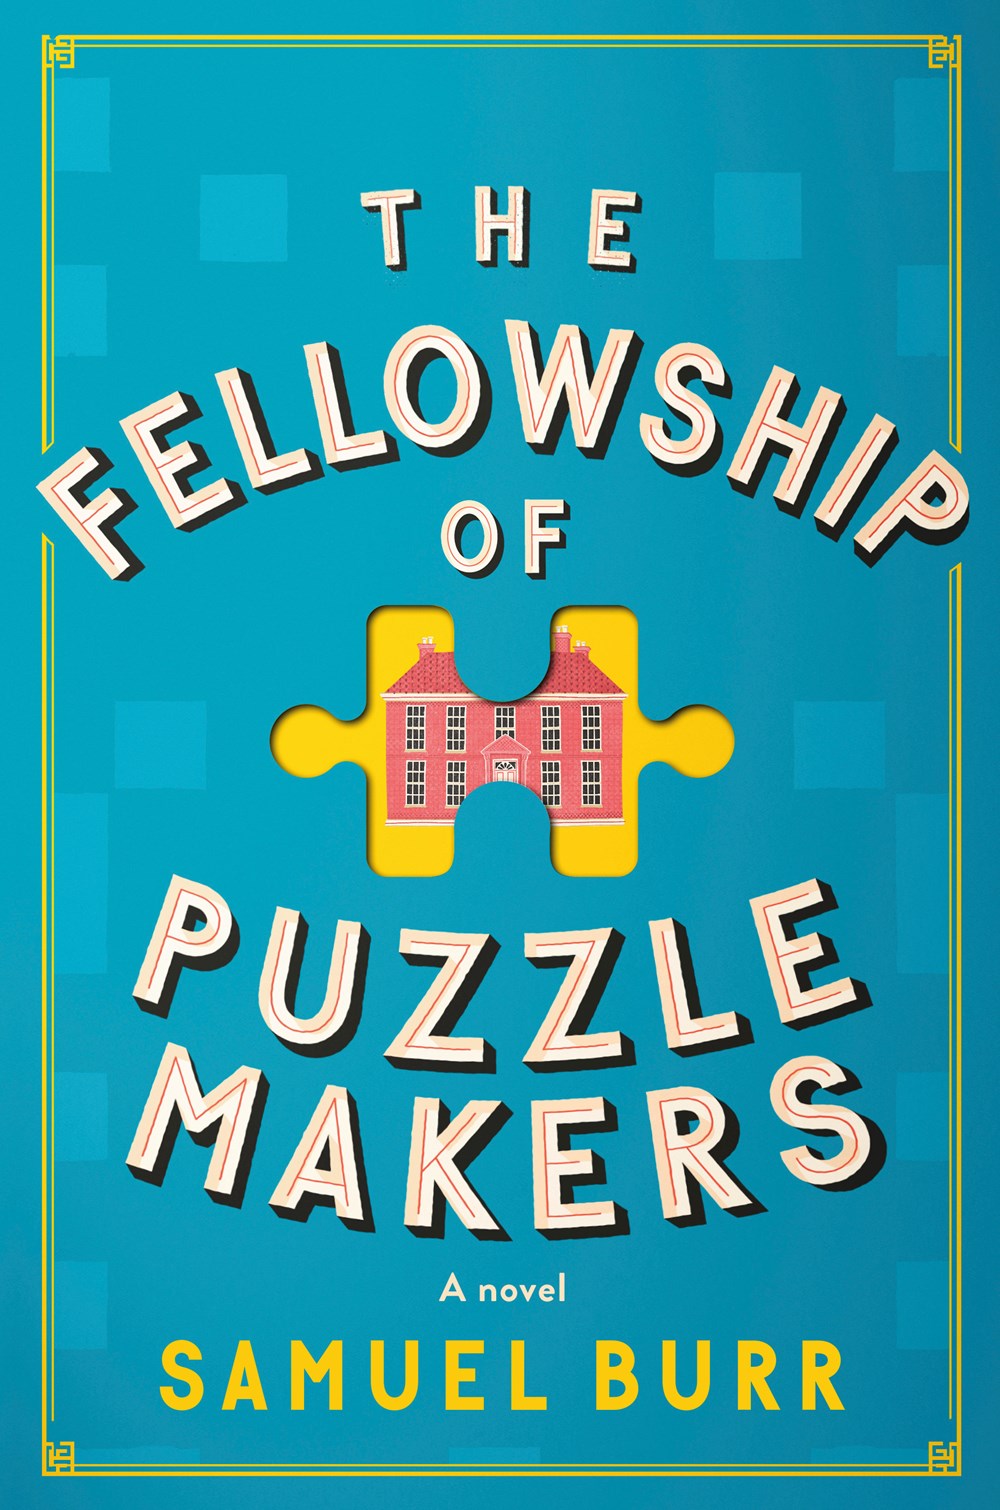 The Fellowship of Puzzle Makers